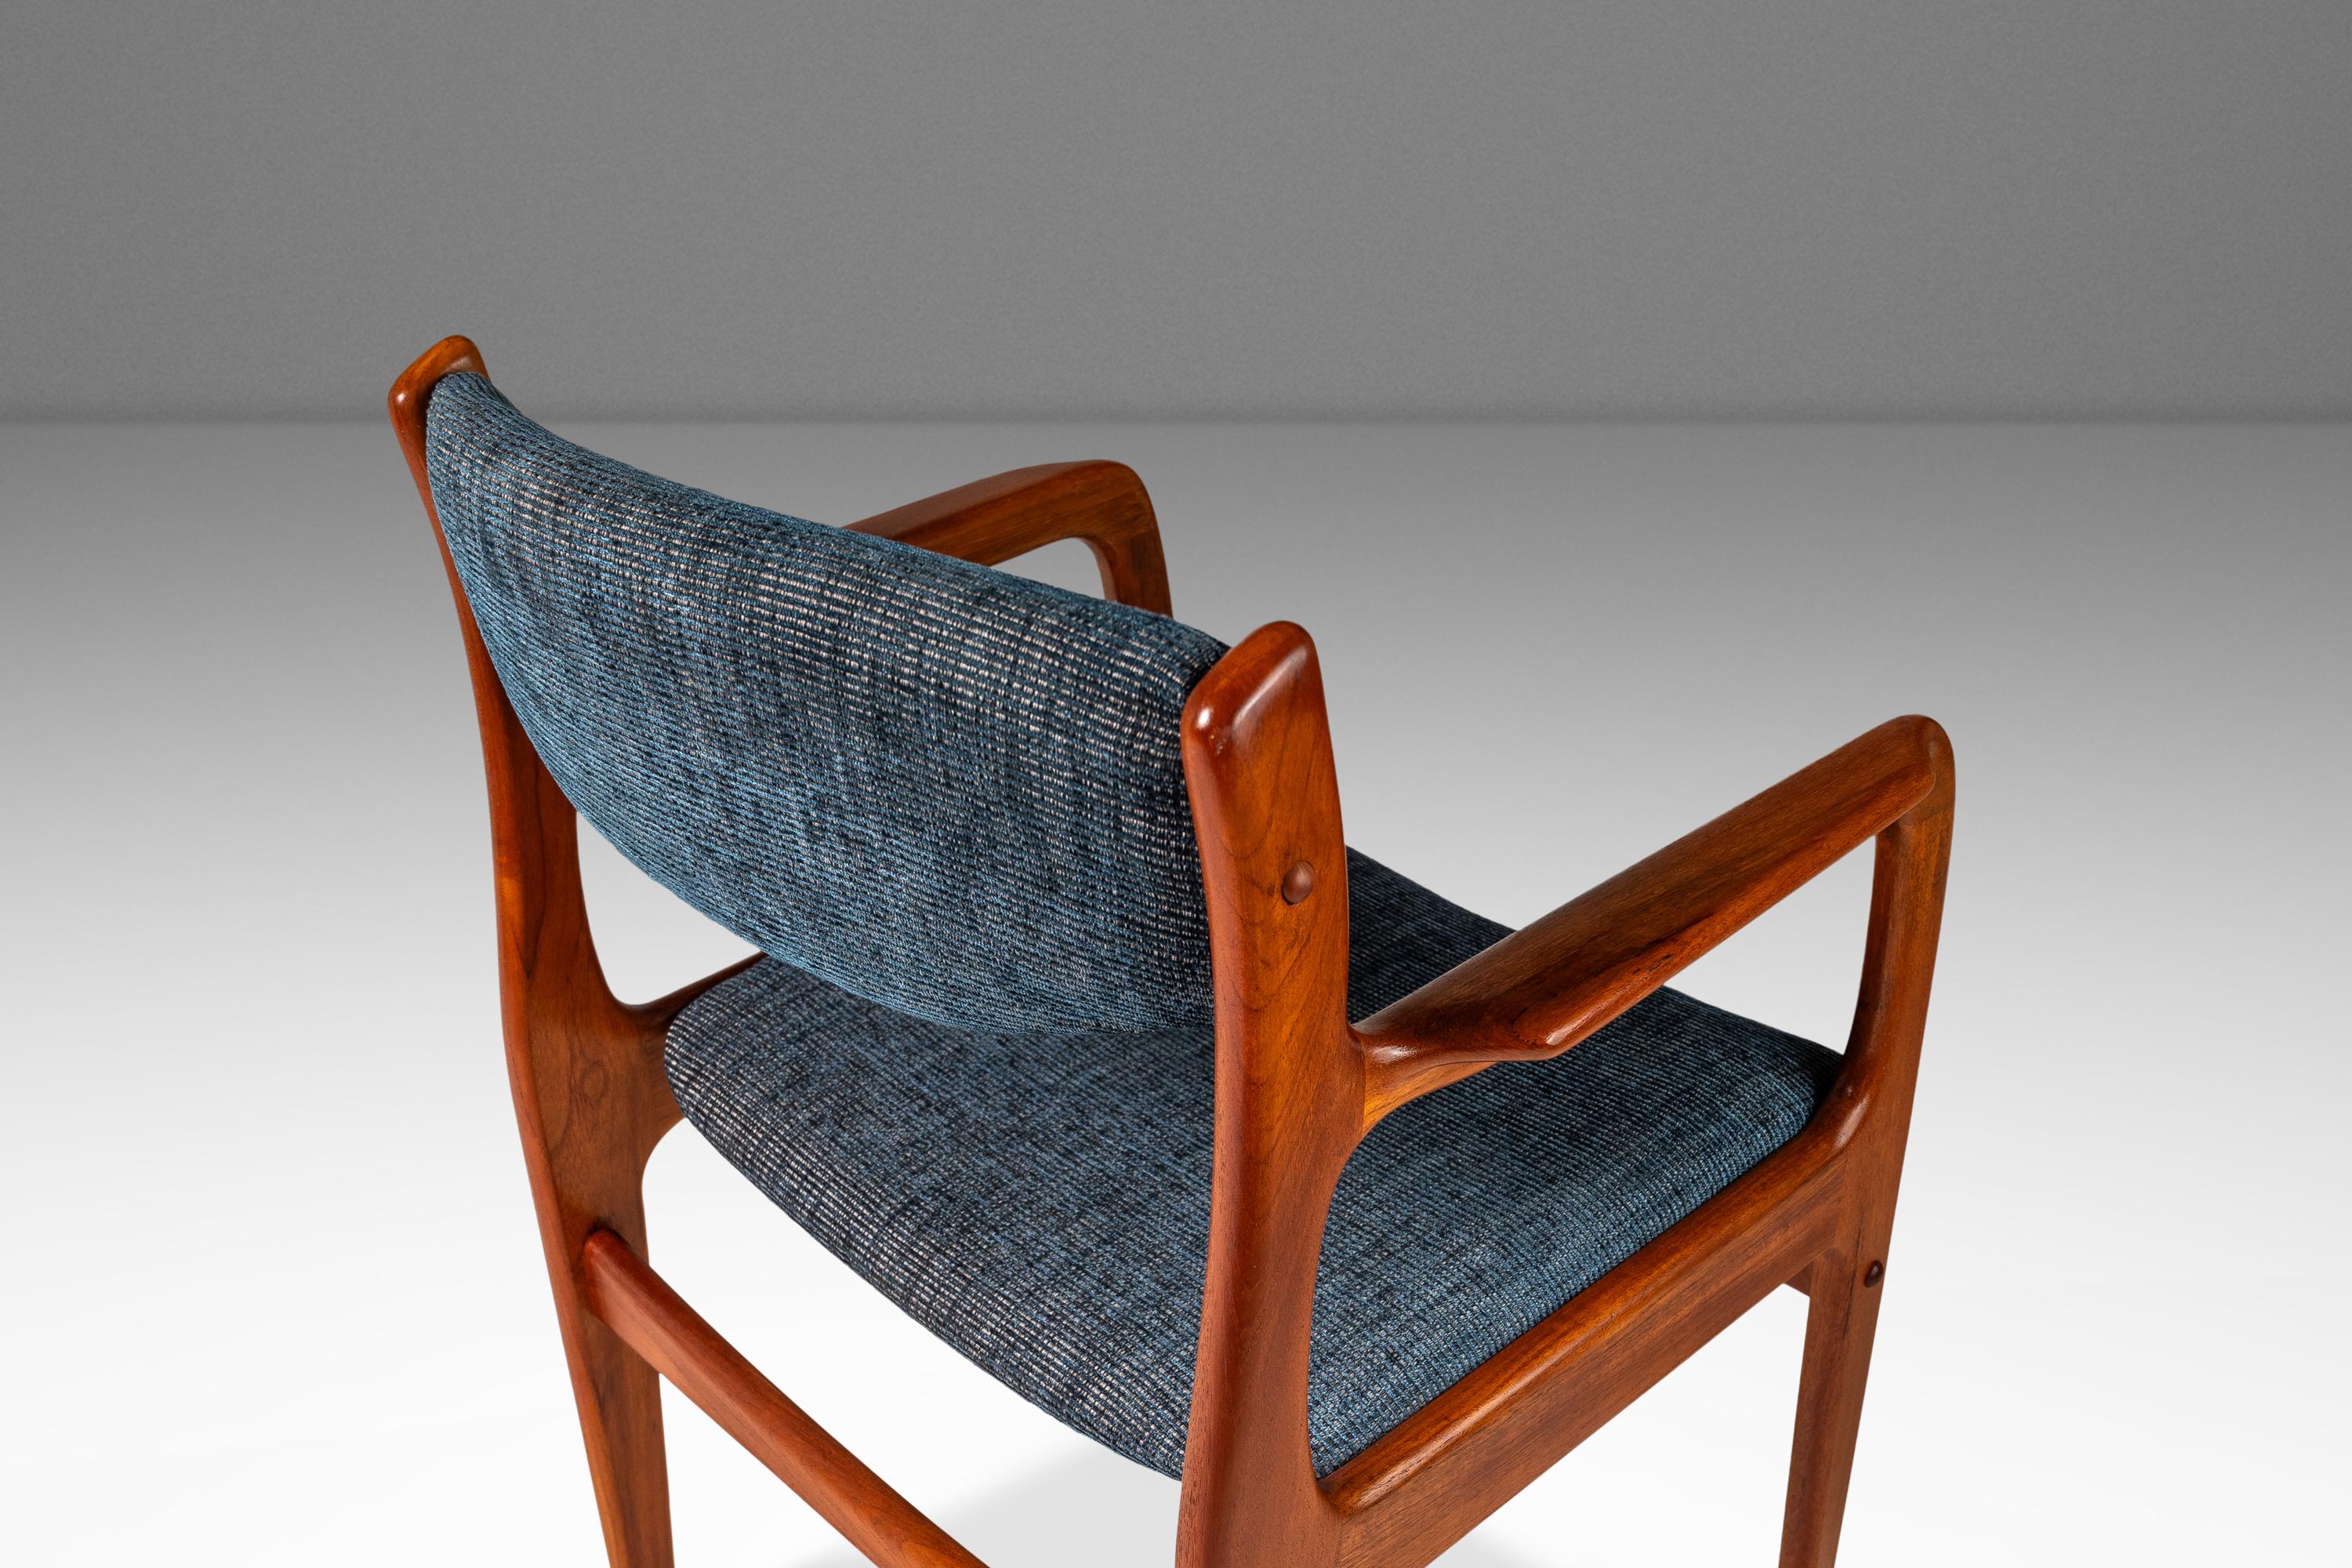 Late 20th Century Arm Chair in Solid Teak and New Upholstery by Benny Linden Designs, c. 1970s For Sale